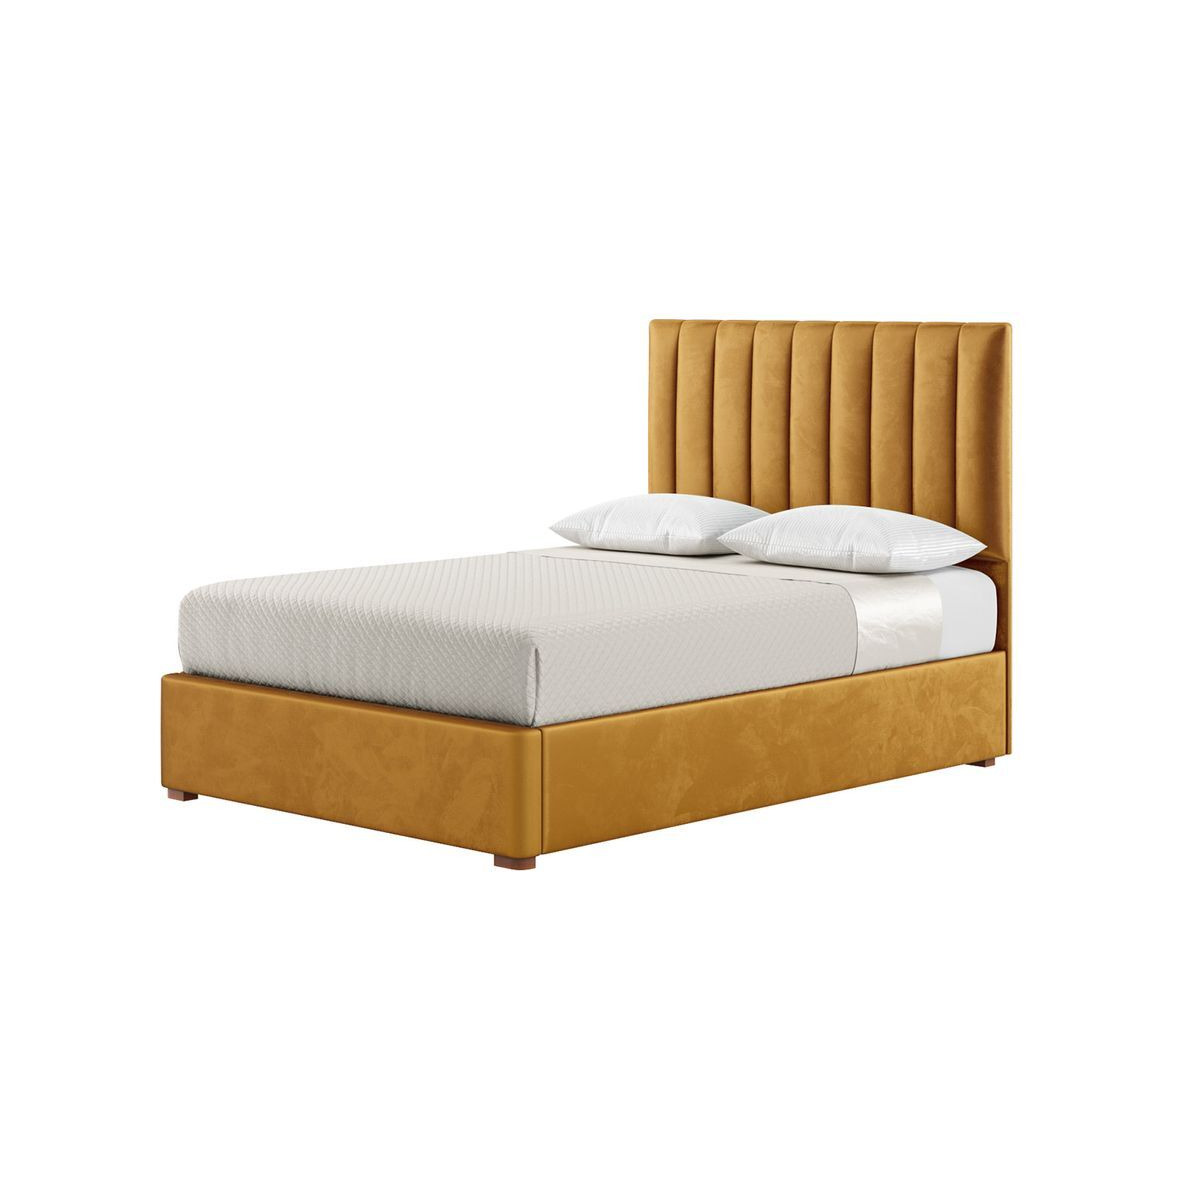 Naomi 4ft6 Double Bed Frame With Fluted Vertical Stitch Headboard, mustard, Leg colour: aveo - image 1